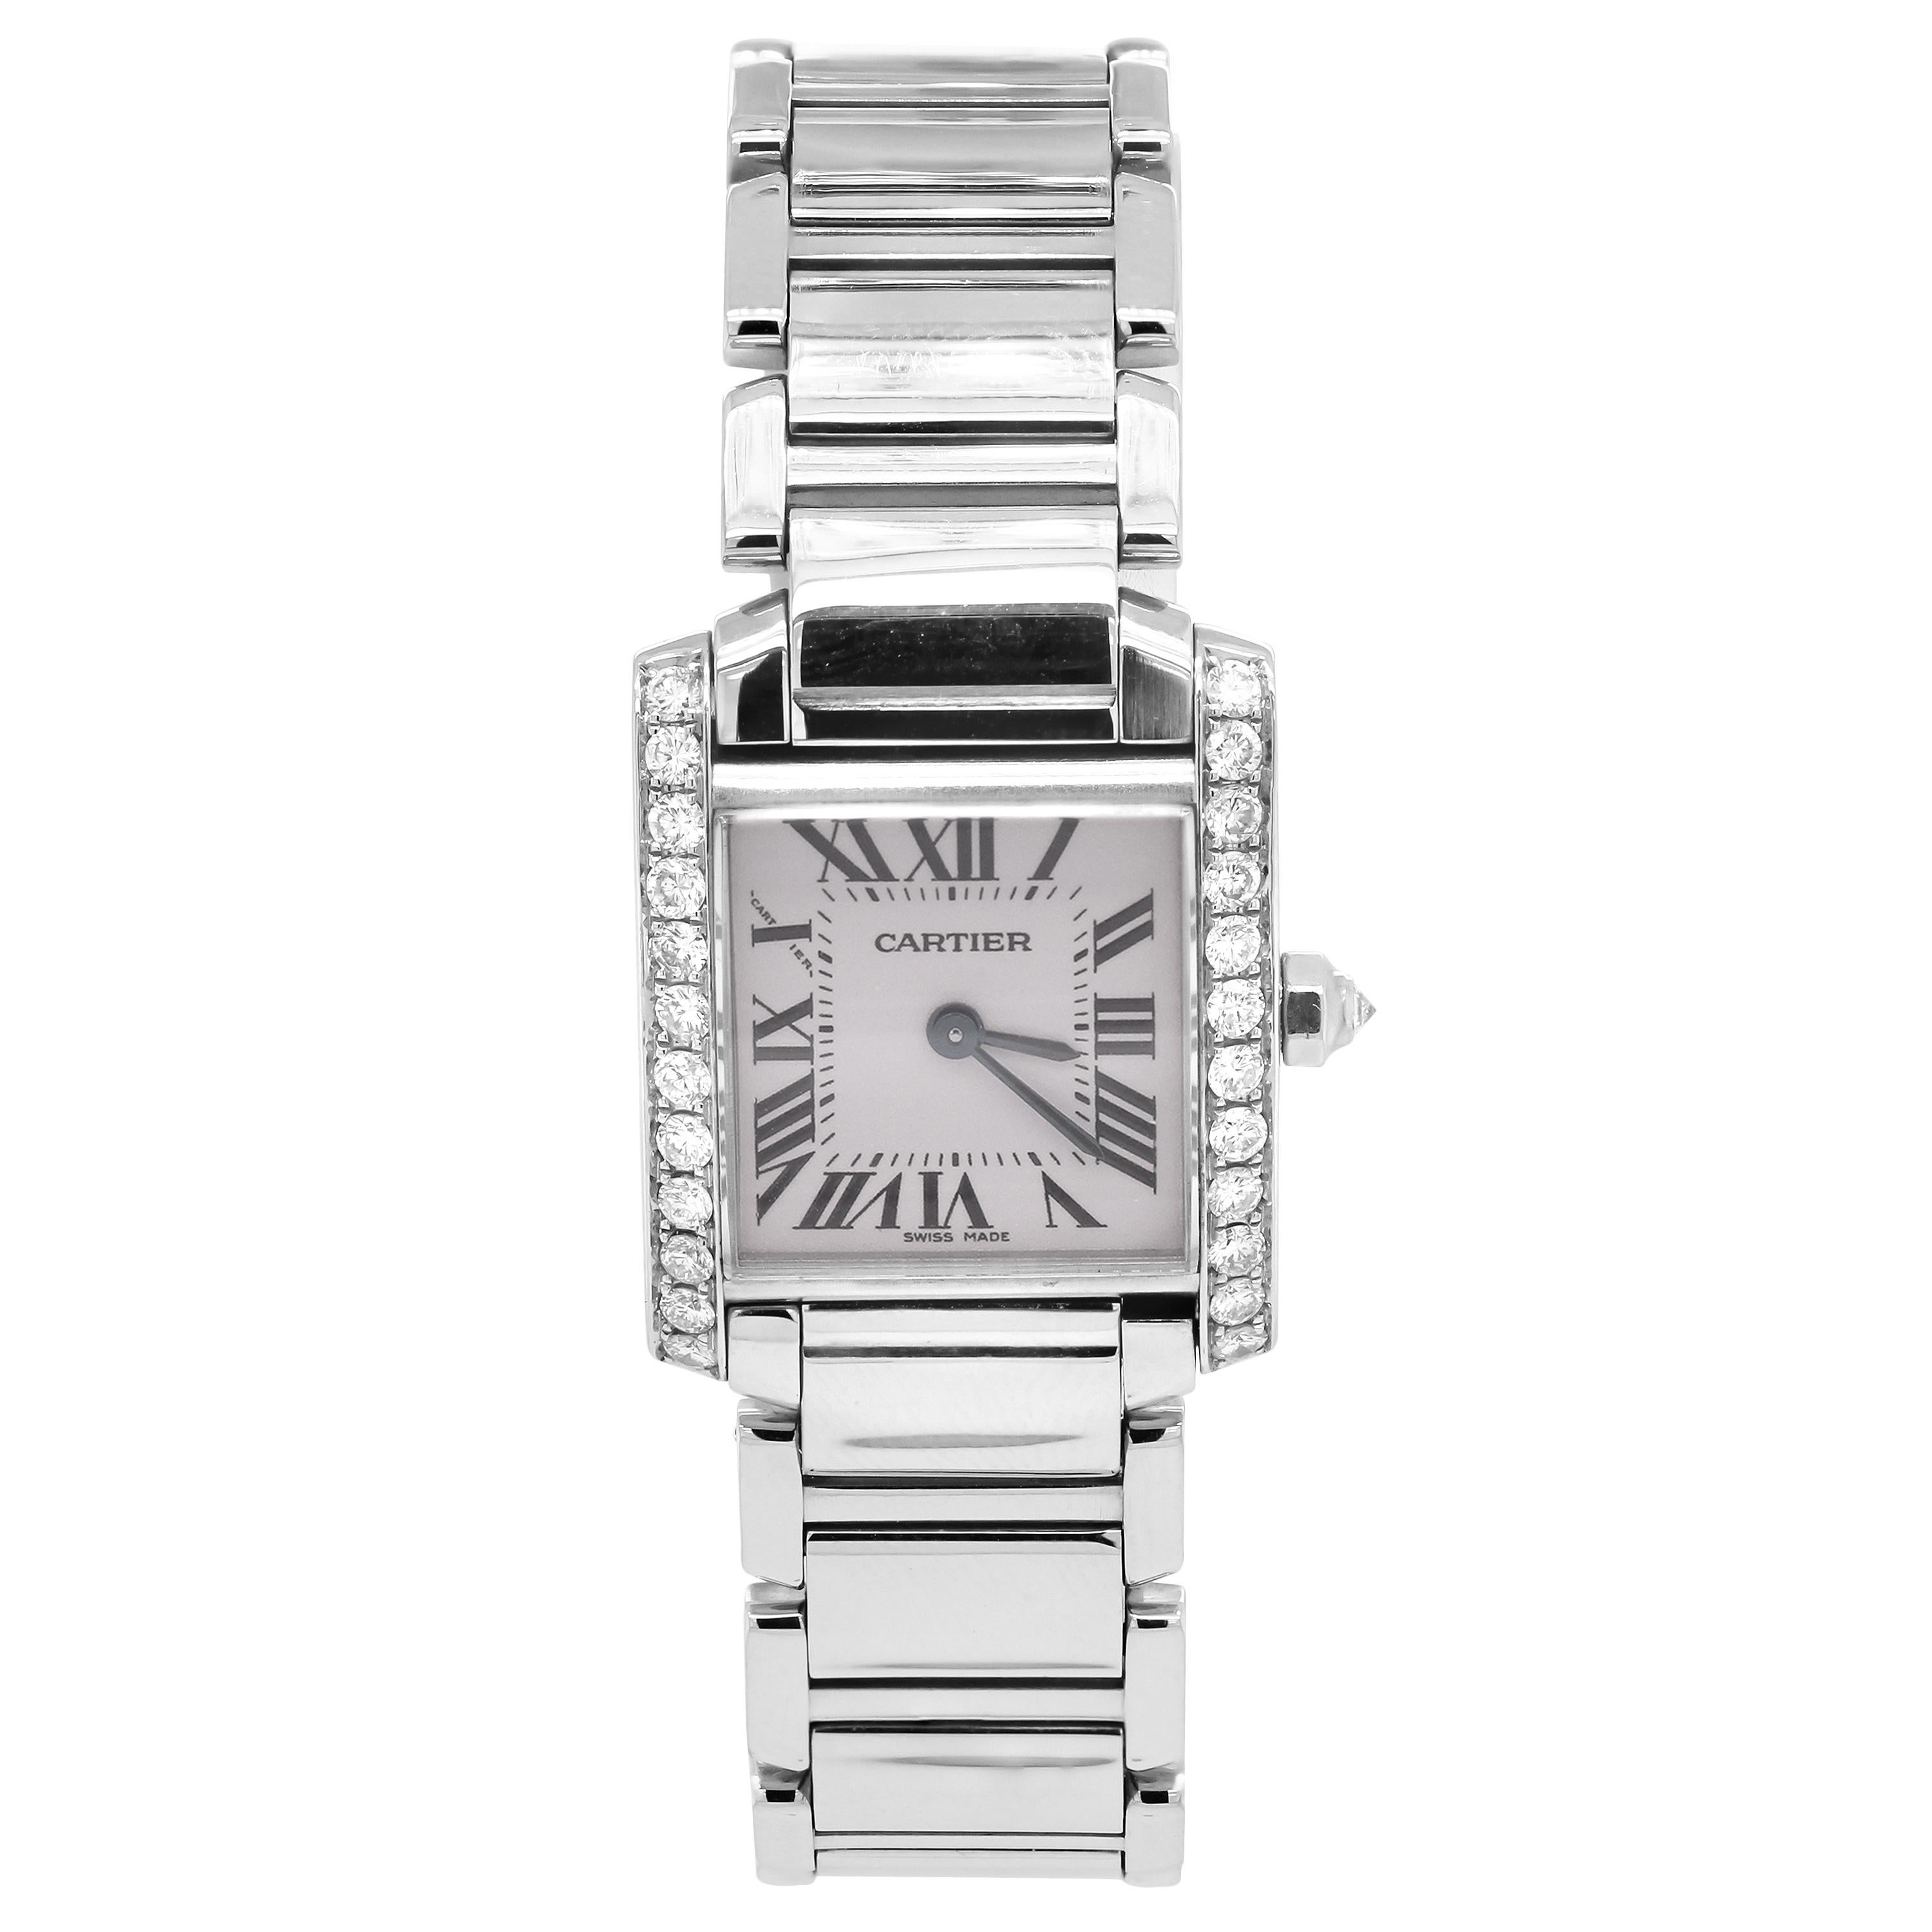 Cartier Tank Francaise Stainless Steel White Diamond Bezel Ladies Watch 2384

Mint condition. Comes with original Cartier box.

Case Material: Stainless Steel
Case Diameter: 20mm x 25mm
Crystal: Diamond

0.80 carat G color, VS clarity diamonds.